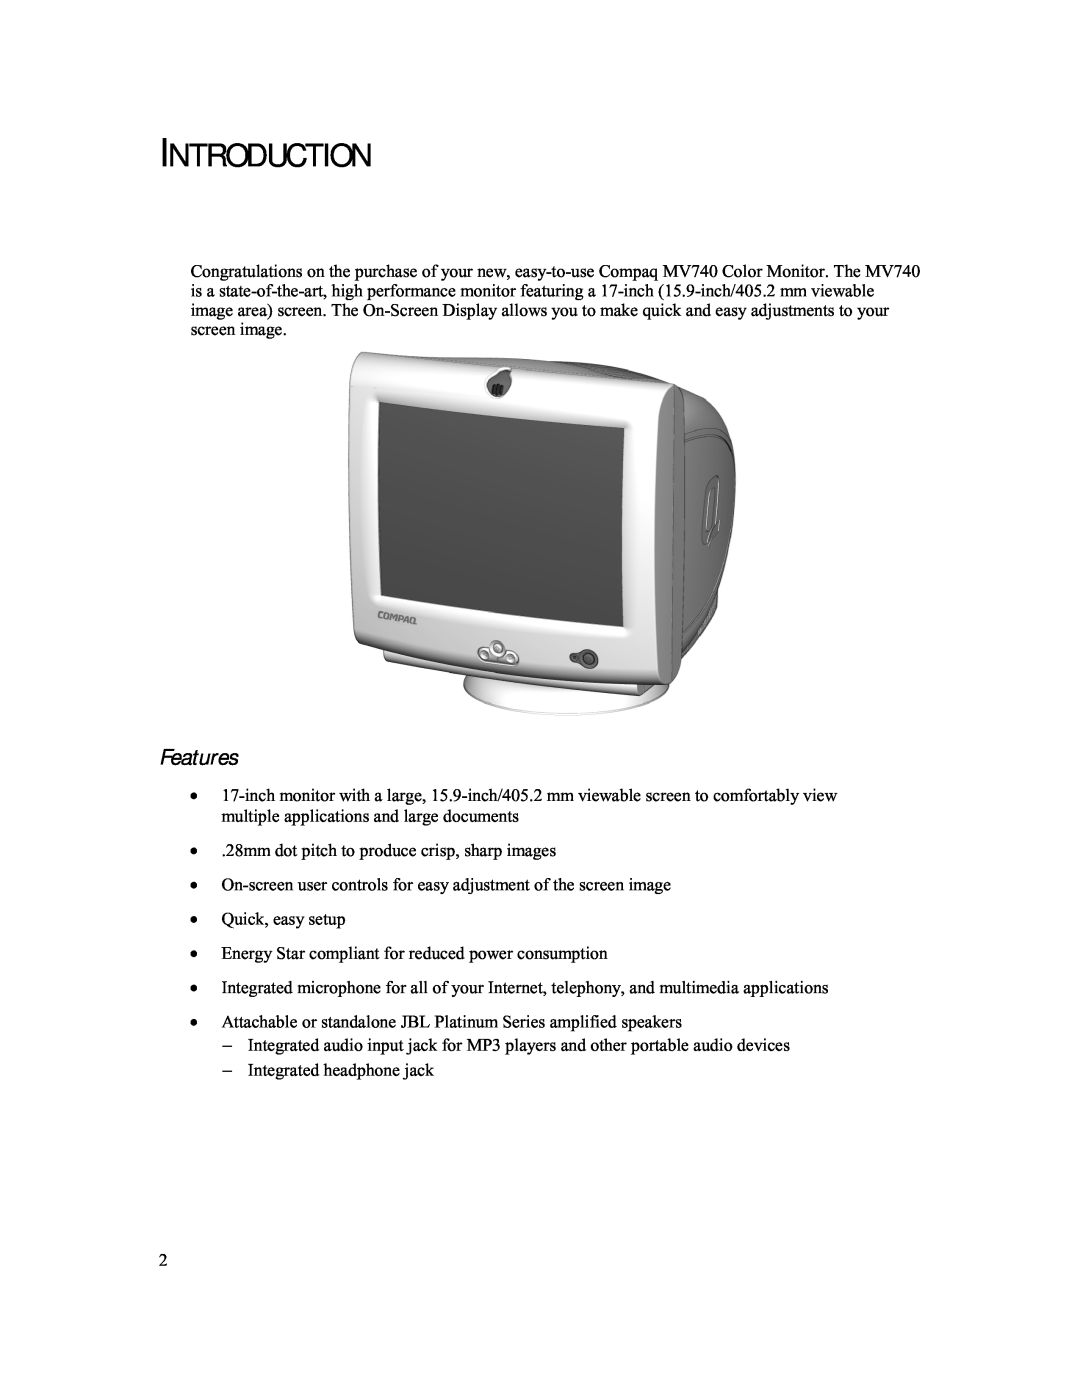 Compaq 740 manual Introduction, Features 